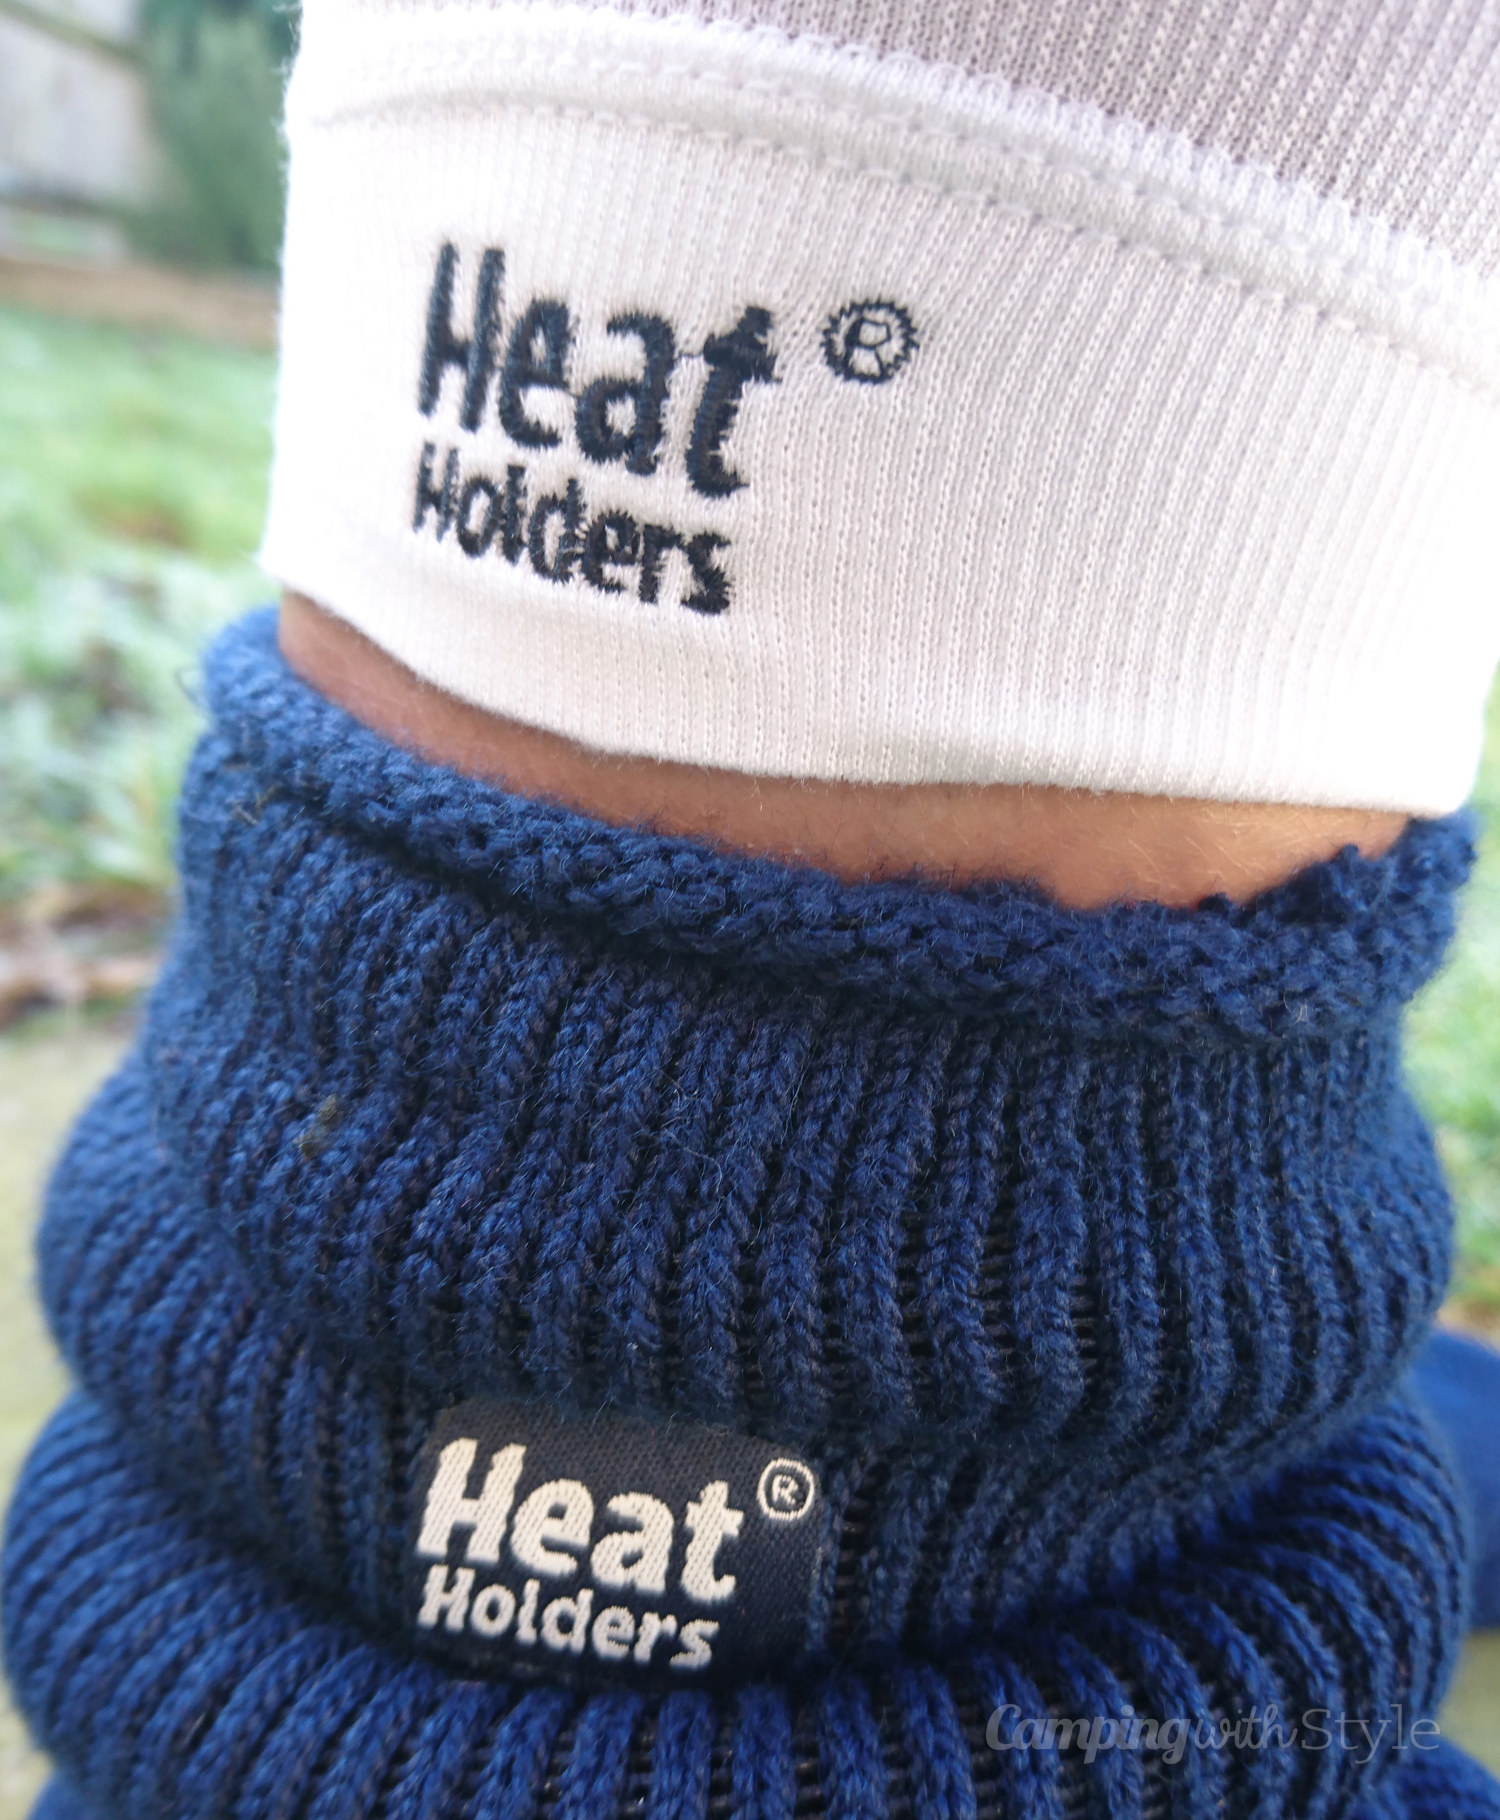 Putting Heat Holders To The Test On A Frosty Morning Walk